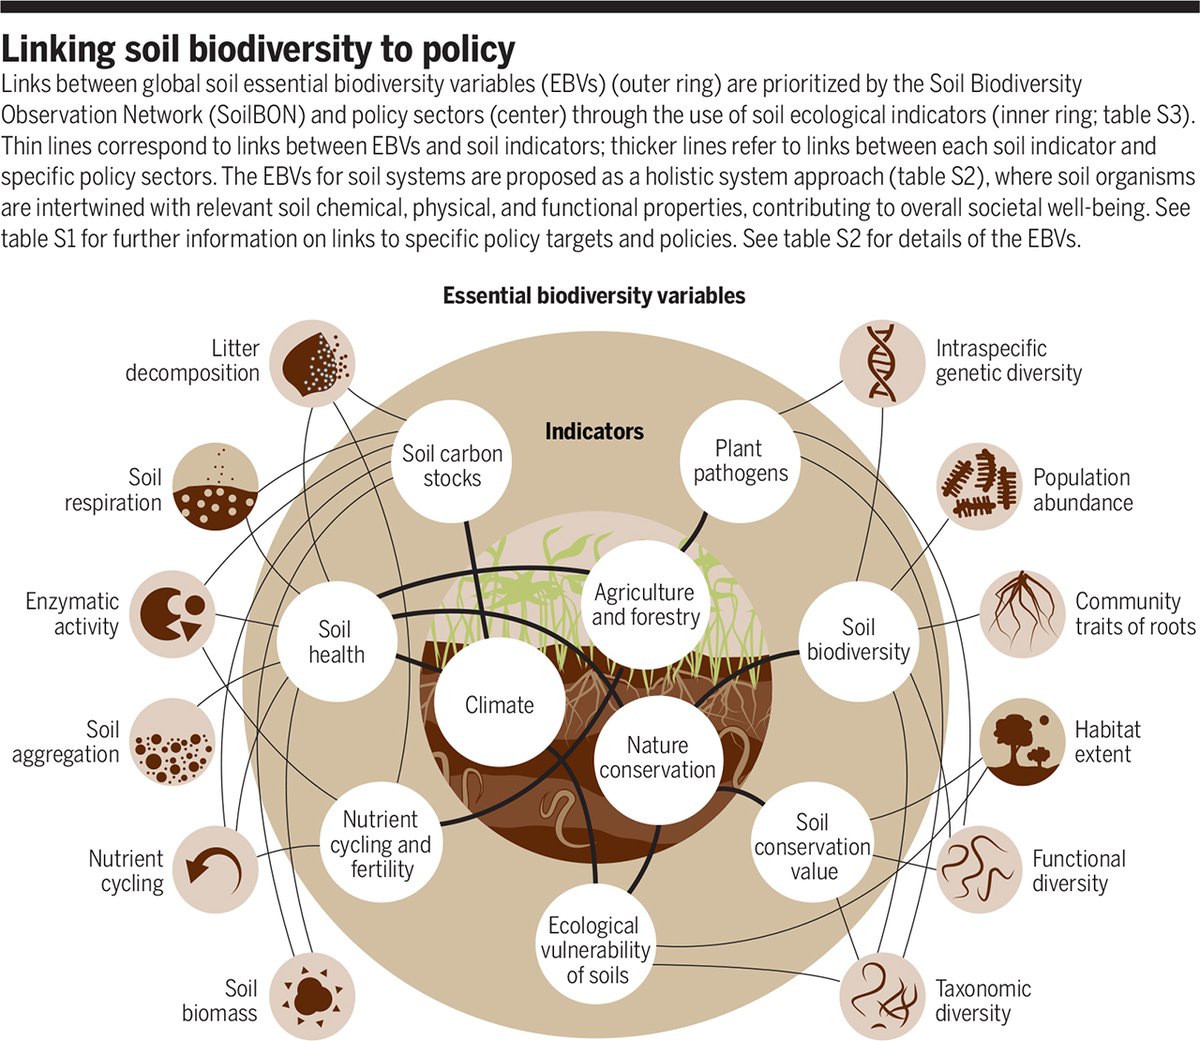 Despite harboring nearly a quarter of all species on Earth, soils and the diverse life within them are almost always overlooked in conservation policies.

A #SciencePolicyForum argues that they require explicit consideration and protections. scim.ag/56P